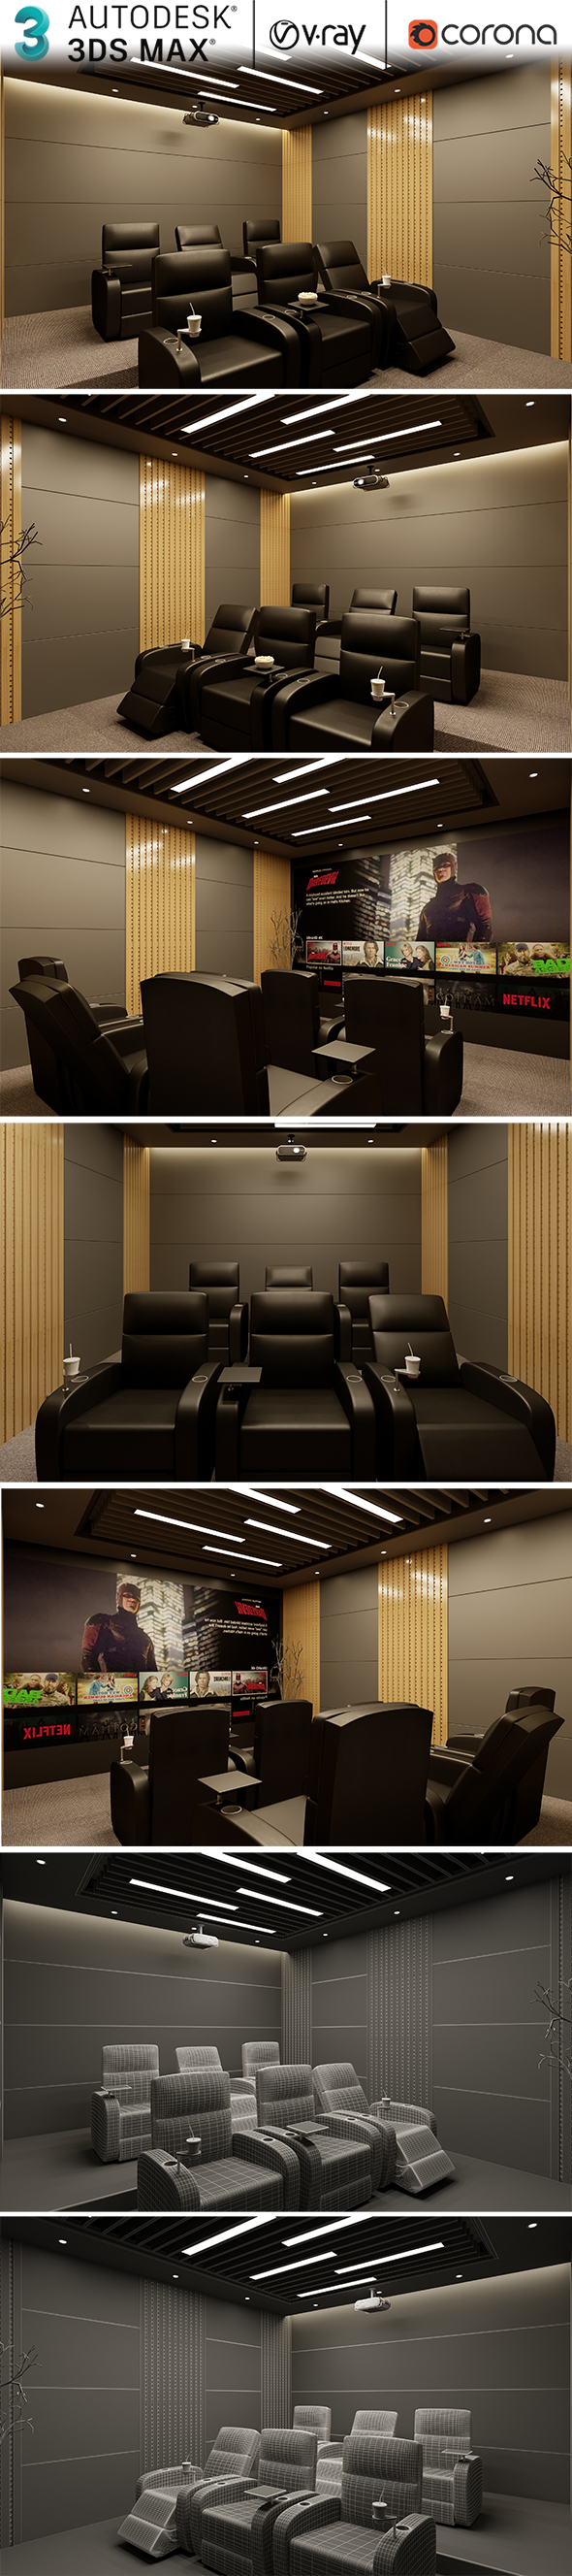 [DOWNLOAD]Home Cinema Design Collection 05